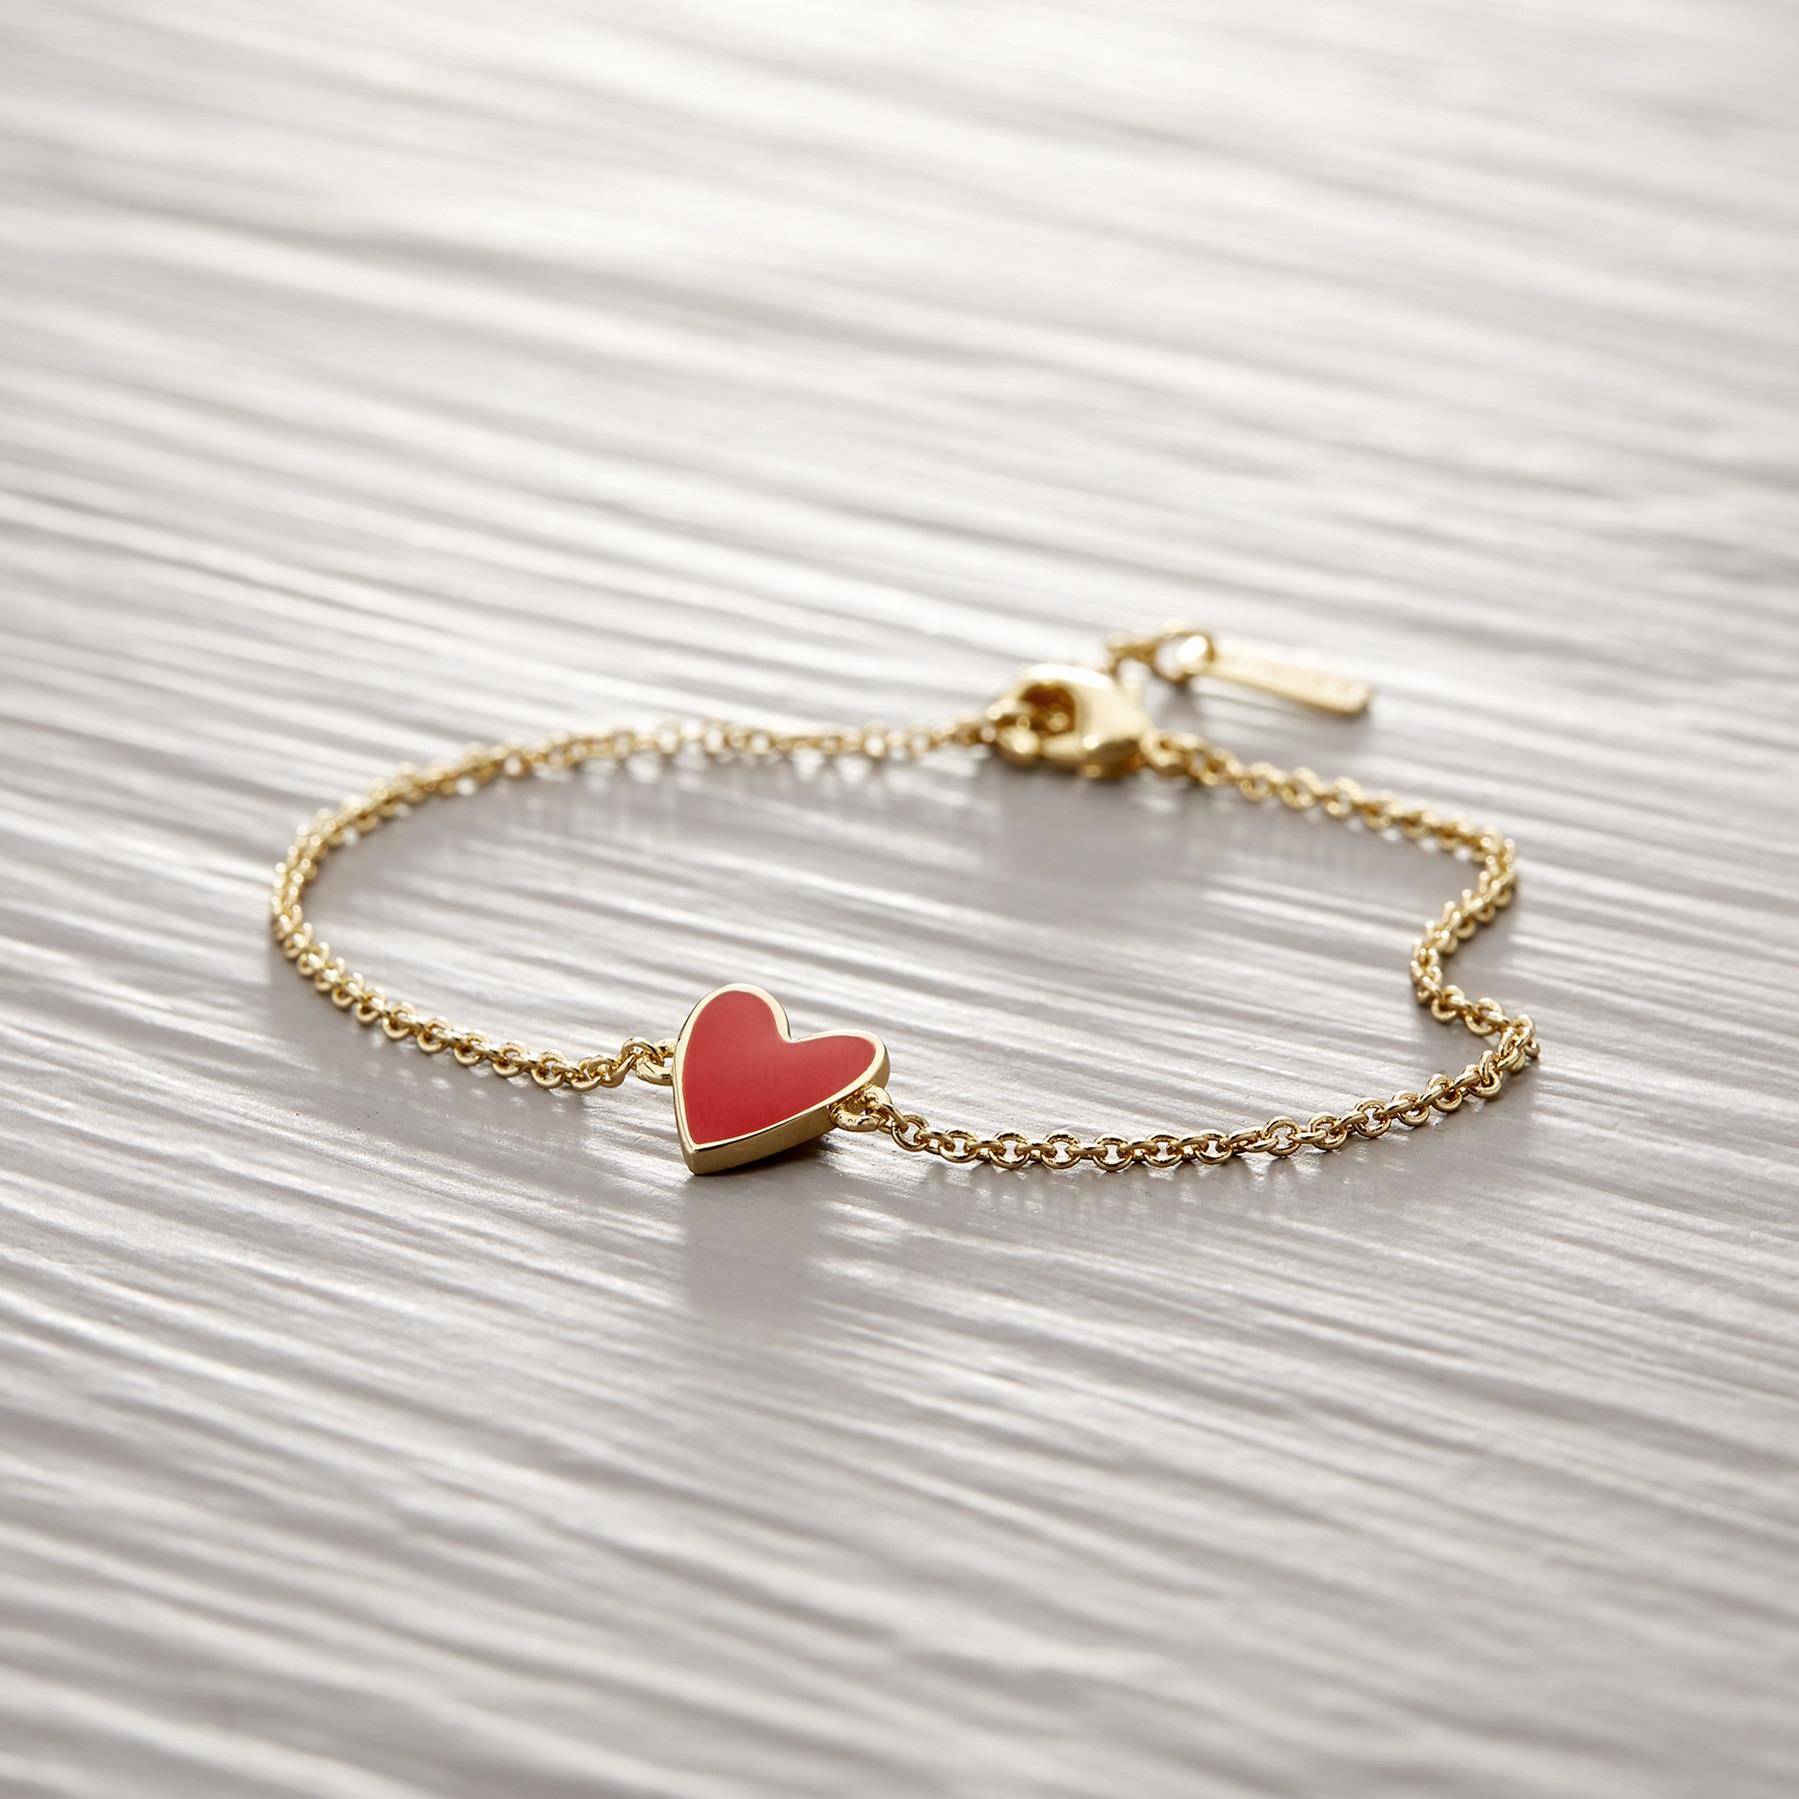 FIRST LOVE. Bracelet with a heart